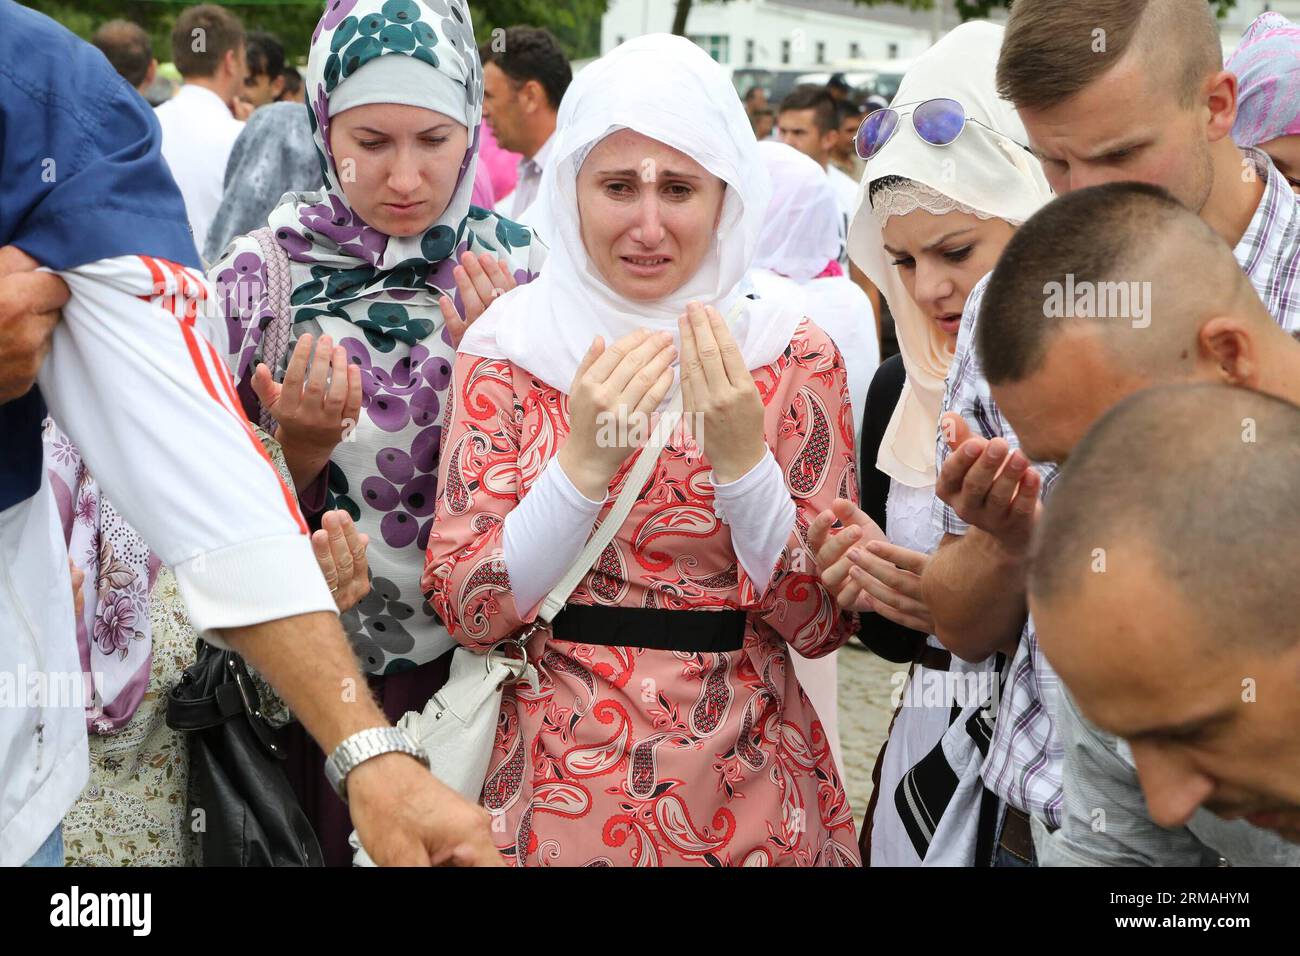 A young woman mourns for her father during a funeral in Potocari, near Srebrenica, Bosnia and Herzegovina, July 11, 2014. The funeral of 175 recently identified victims was held here Friday to commemorate the 19th anniversary of the Srebrenica massacre. Some 7,000 Muslim men and boys were massacred in and near Srebrenica by Bosnian Serb forces in July 1995, the worst massacre in Europe since the end of World War II. (Xinhua/Haris Memija) (zjl) BIH-SREBRENICA-MASSACRE-19TH ANIVERSARY PUBLICATIONxNOTxINxCHN   a Young Woman  for her Father during a Funeral in  Near Srebrenica Bosnia and Herzegovi Stock Photo